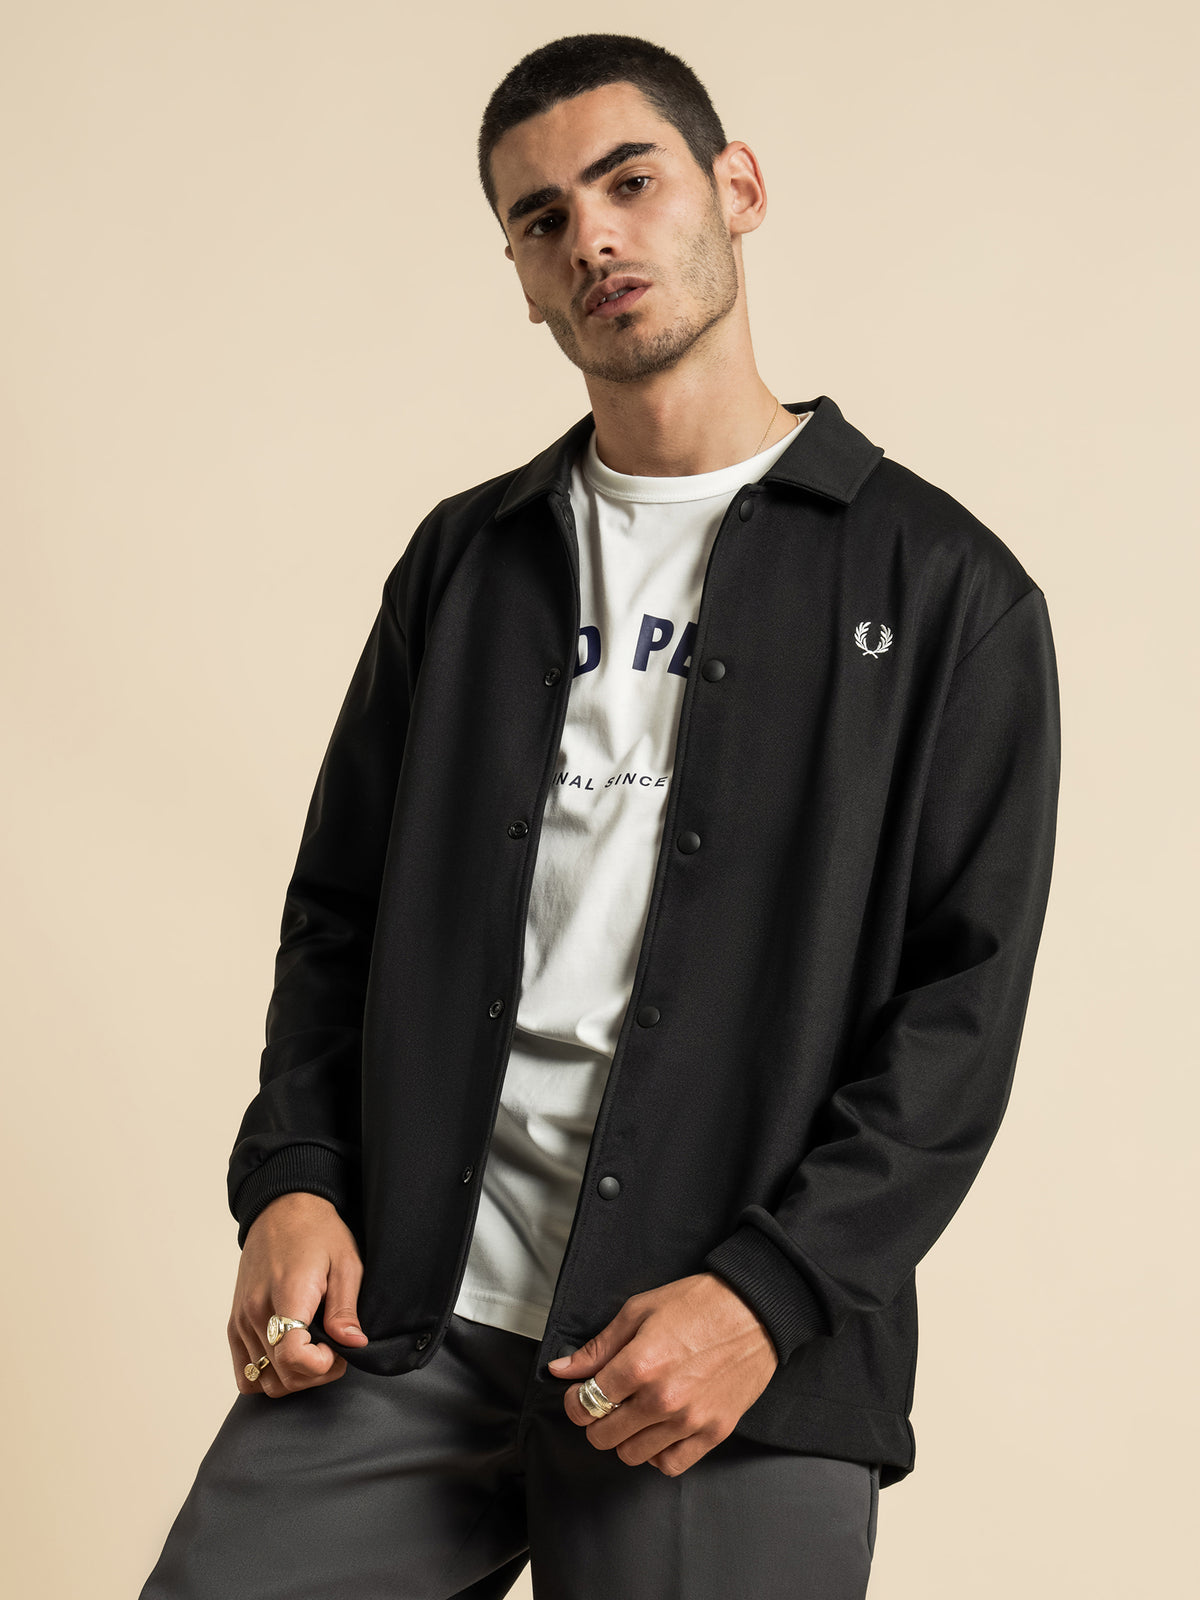 Tricot Coach Jacket in Black